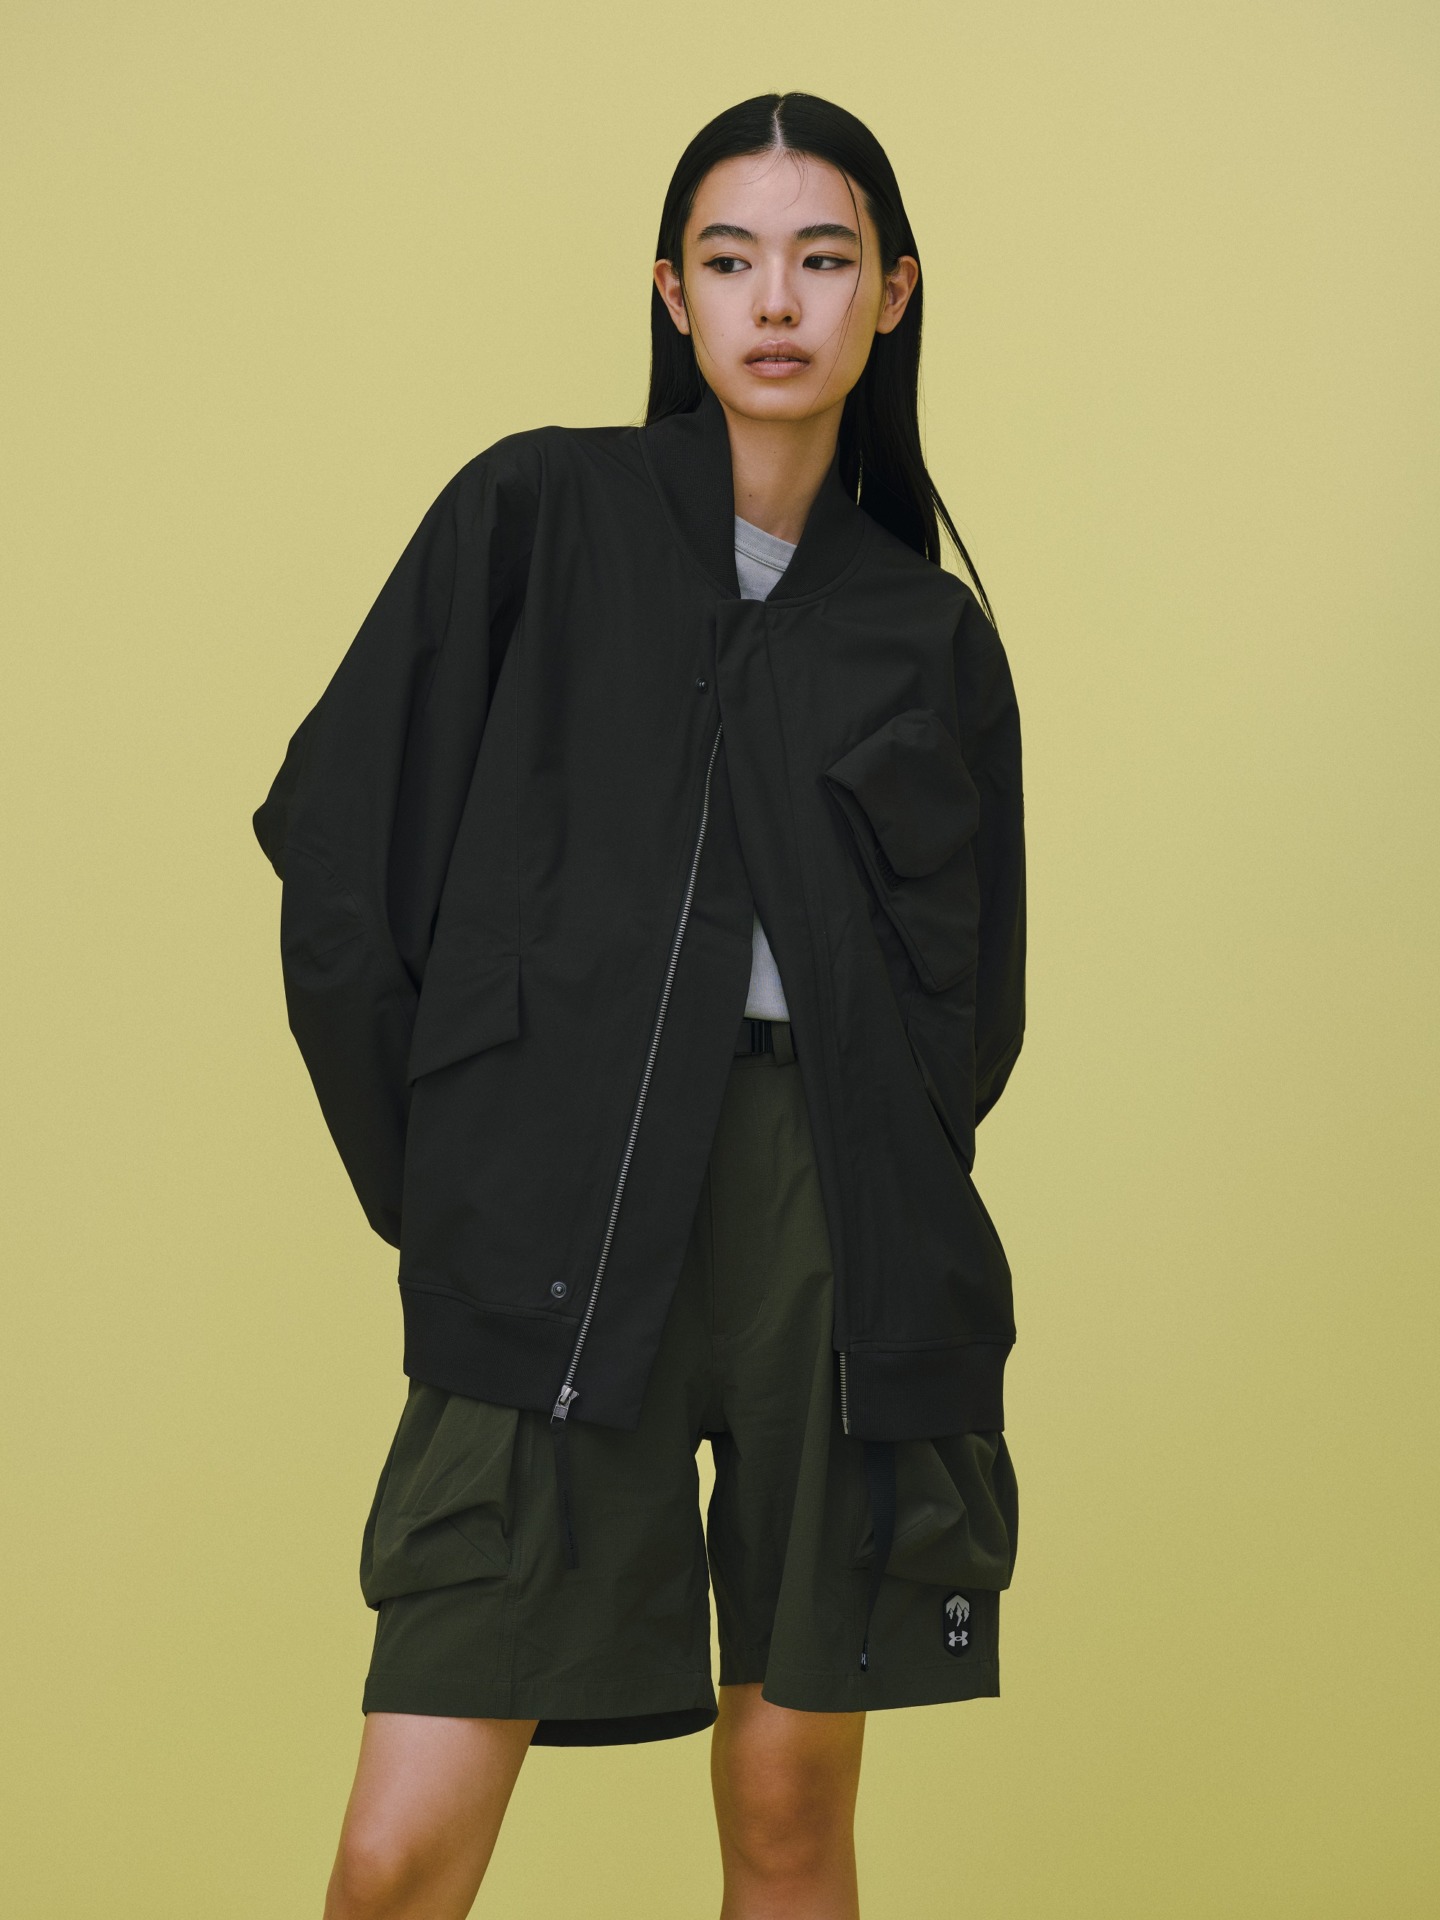 「OUTDOOR STYLE ASIA」のアイテム例